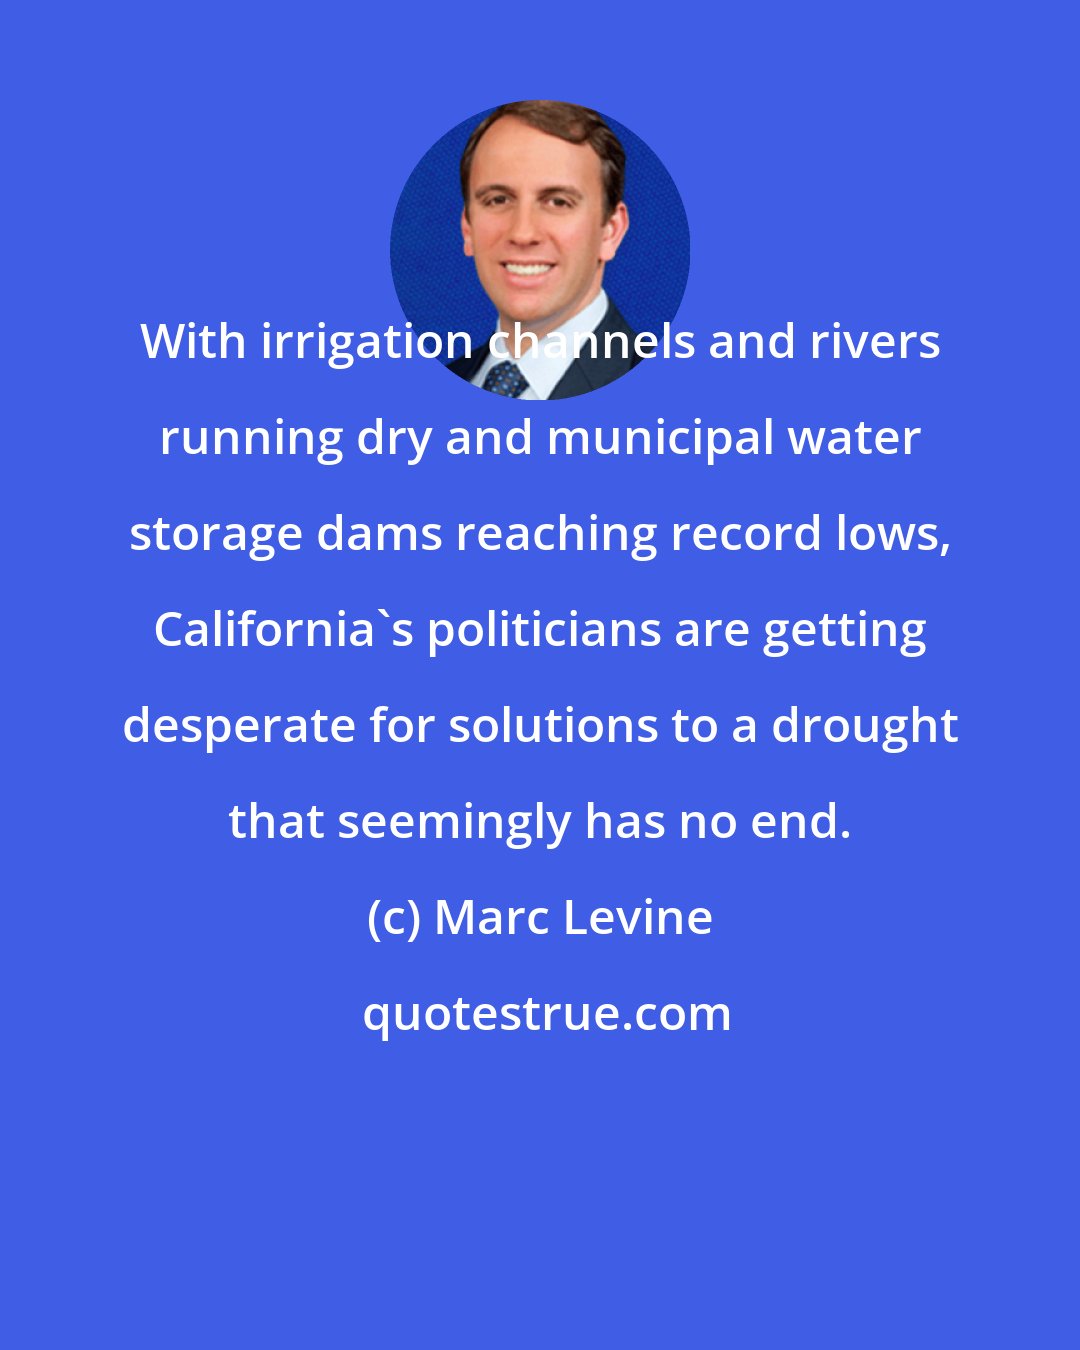 Marc Levine: With irrigation channels and rivers running dry and municipal water storage dams reaching record lows, California's politicians are getting desperate for solutions to a drought that seemingly has no end.